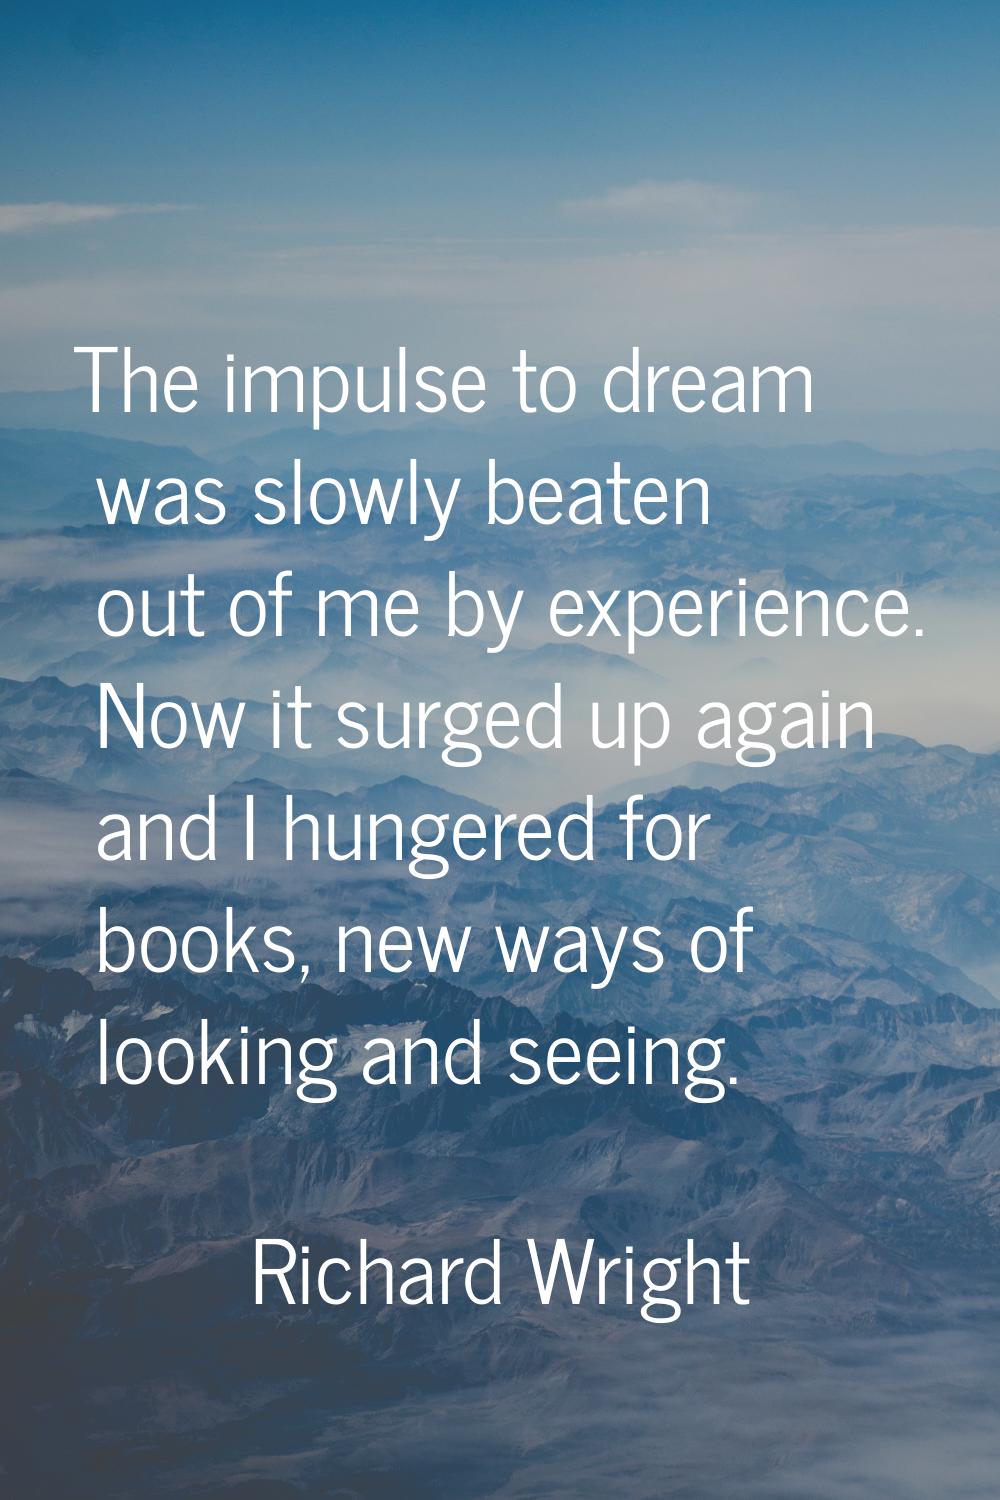 The impulse to dream was slowly beaten out of me by experience. Now it surged up again and I hunger